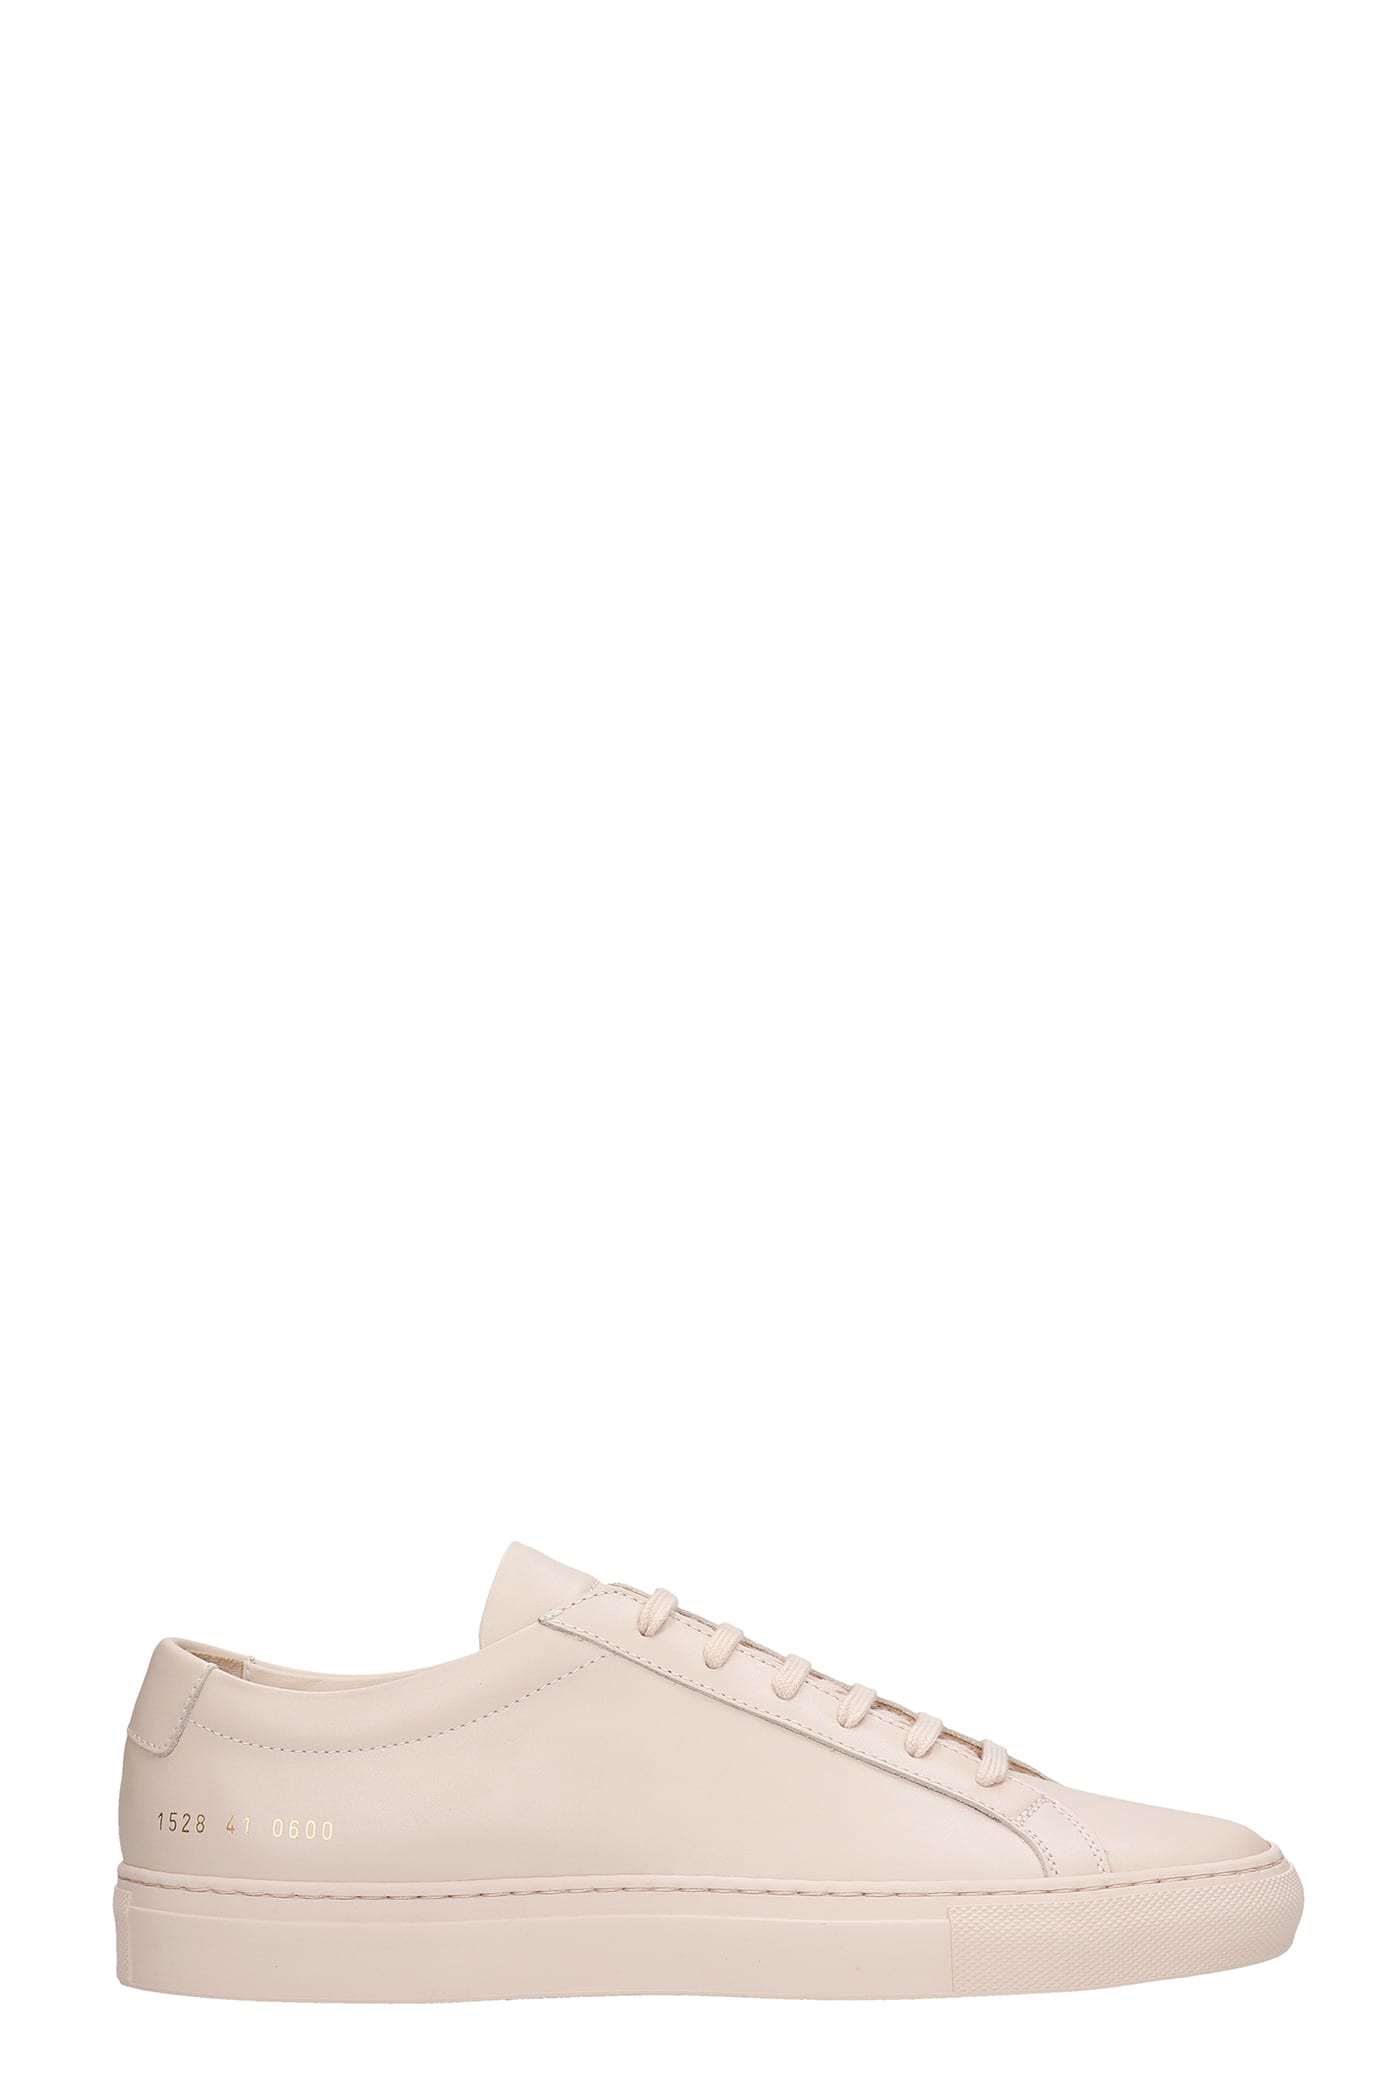 COMMON PROJECTS ORIGINAL ACHILL trainers IN POWDER LEATHER,15280600